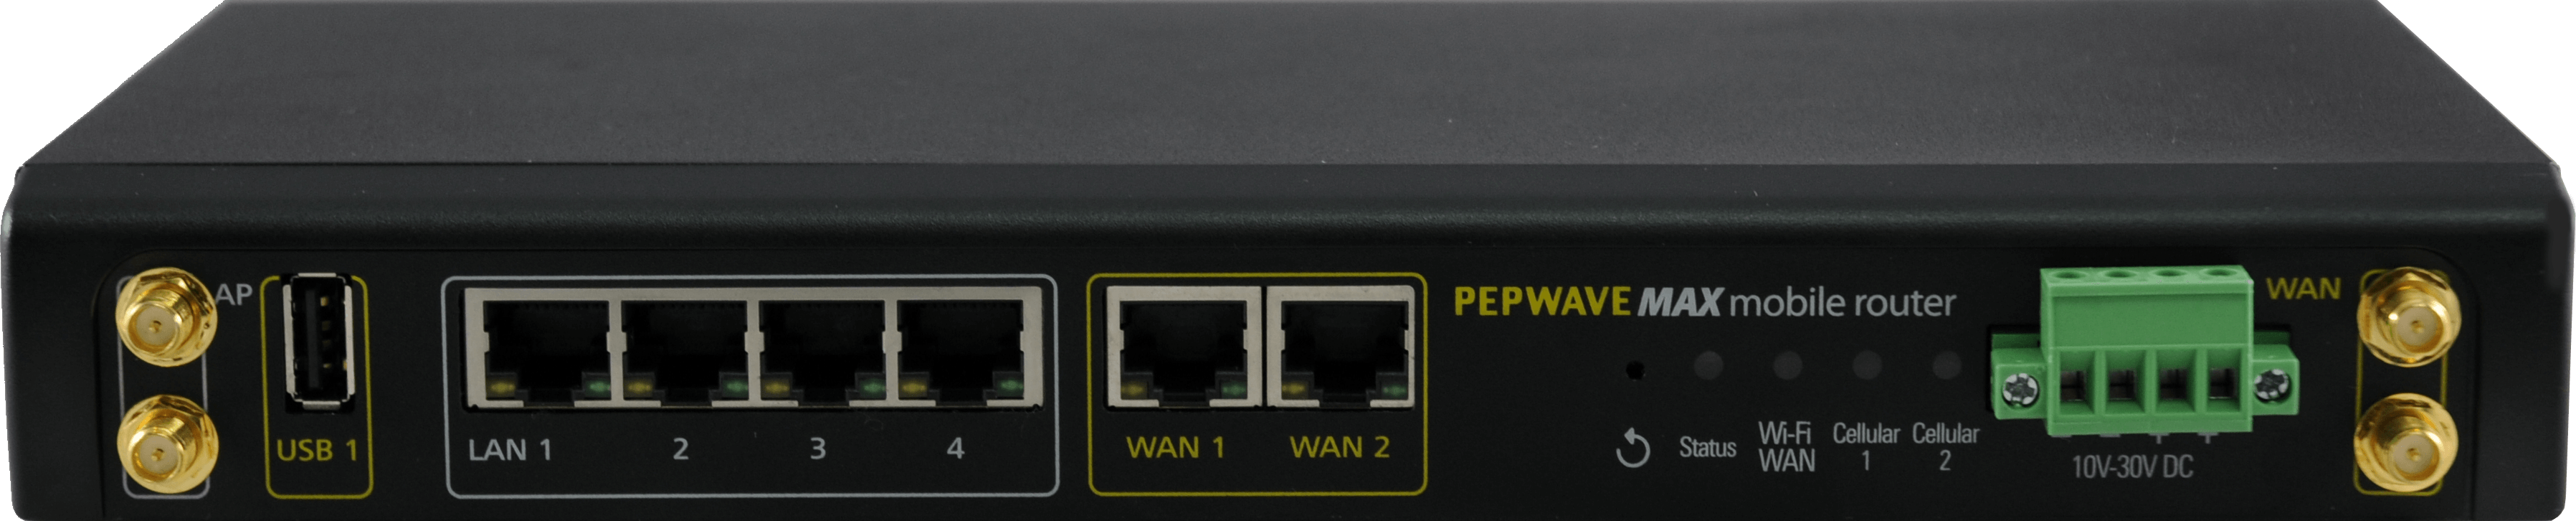 Pepwave MAX HD2 front